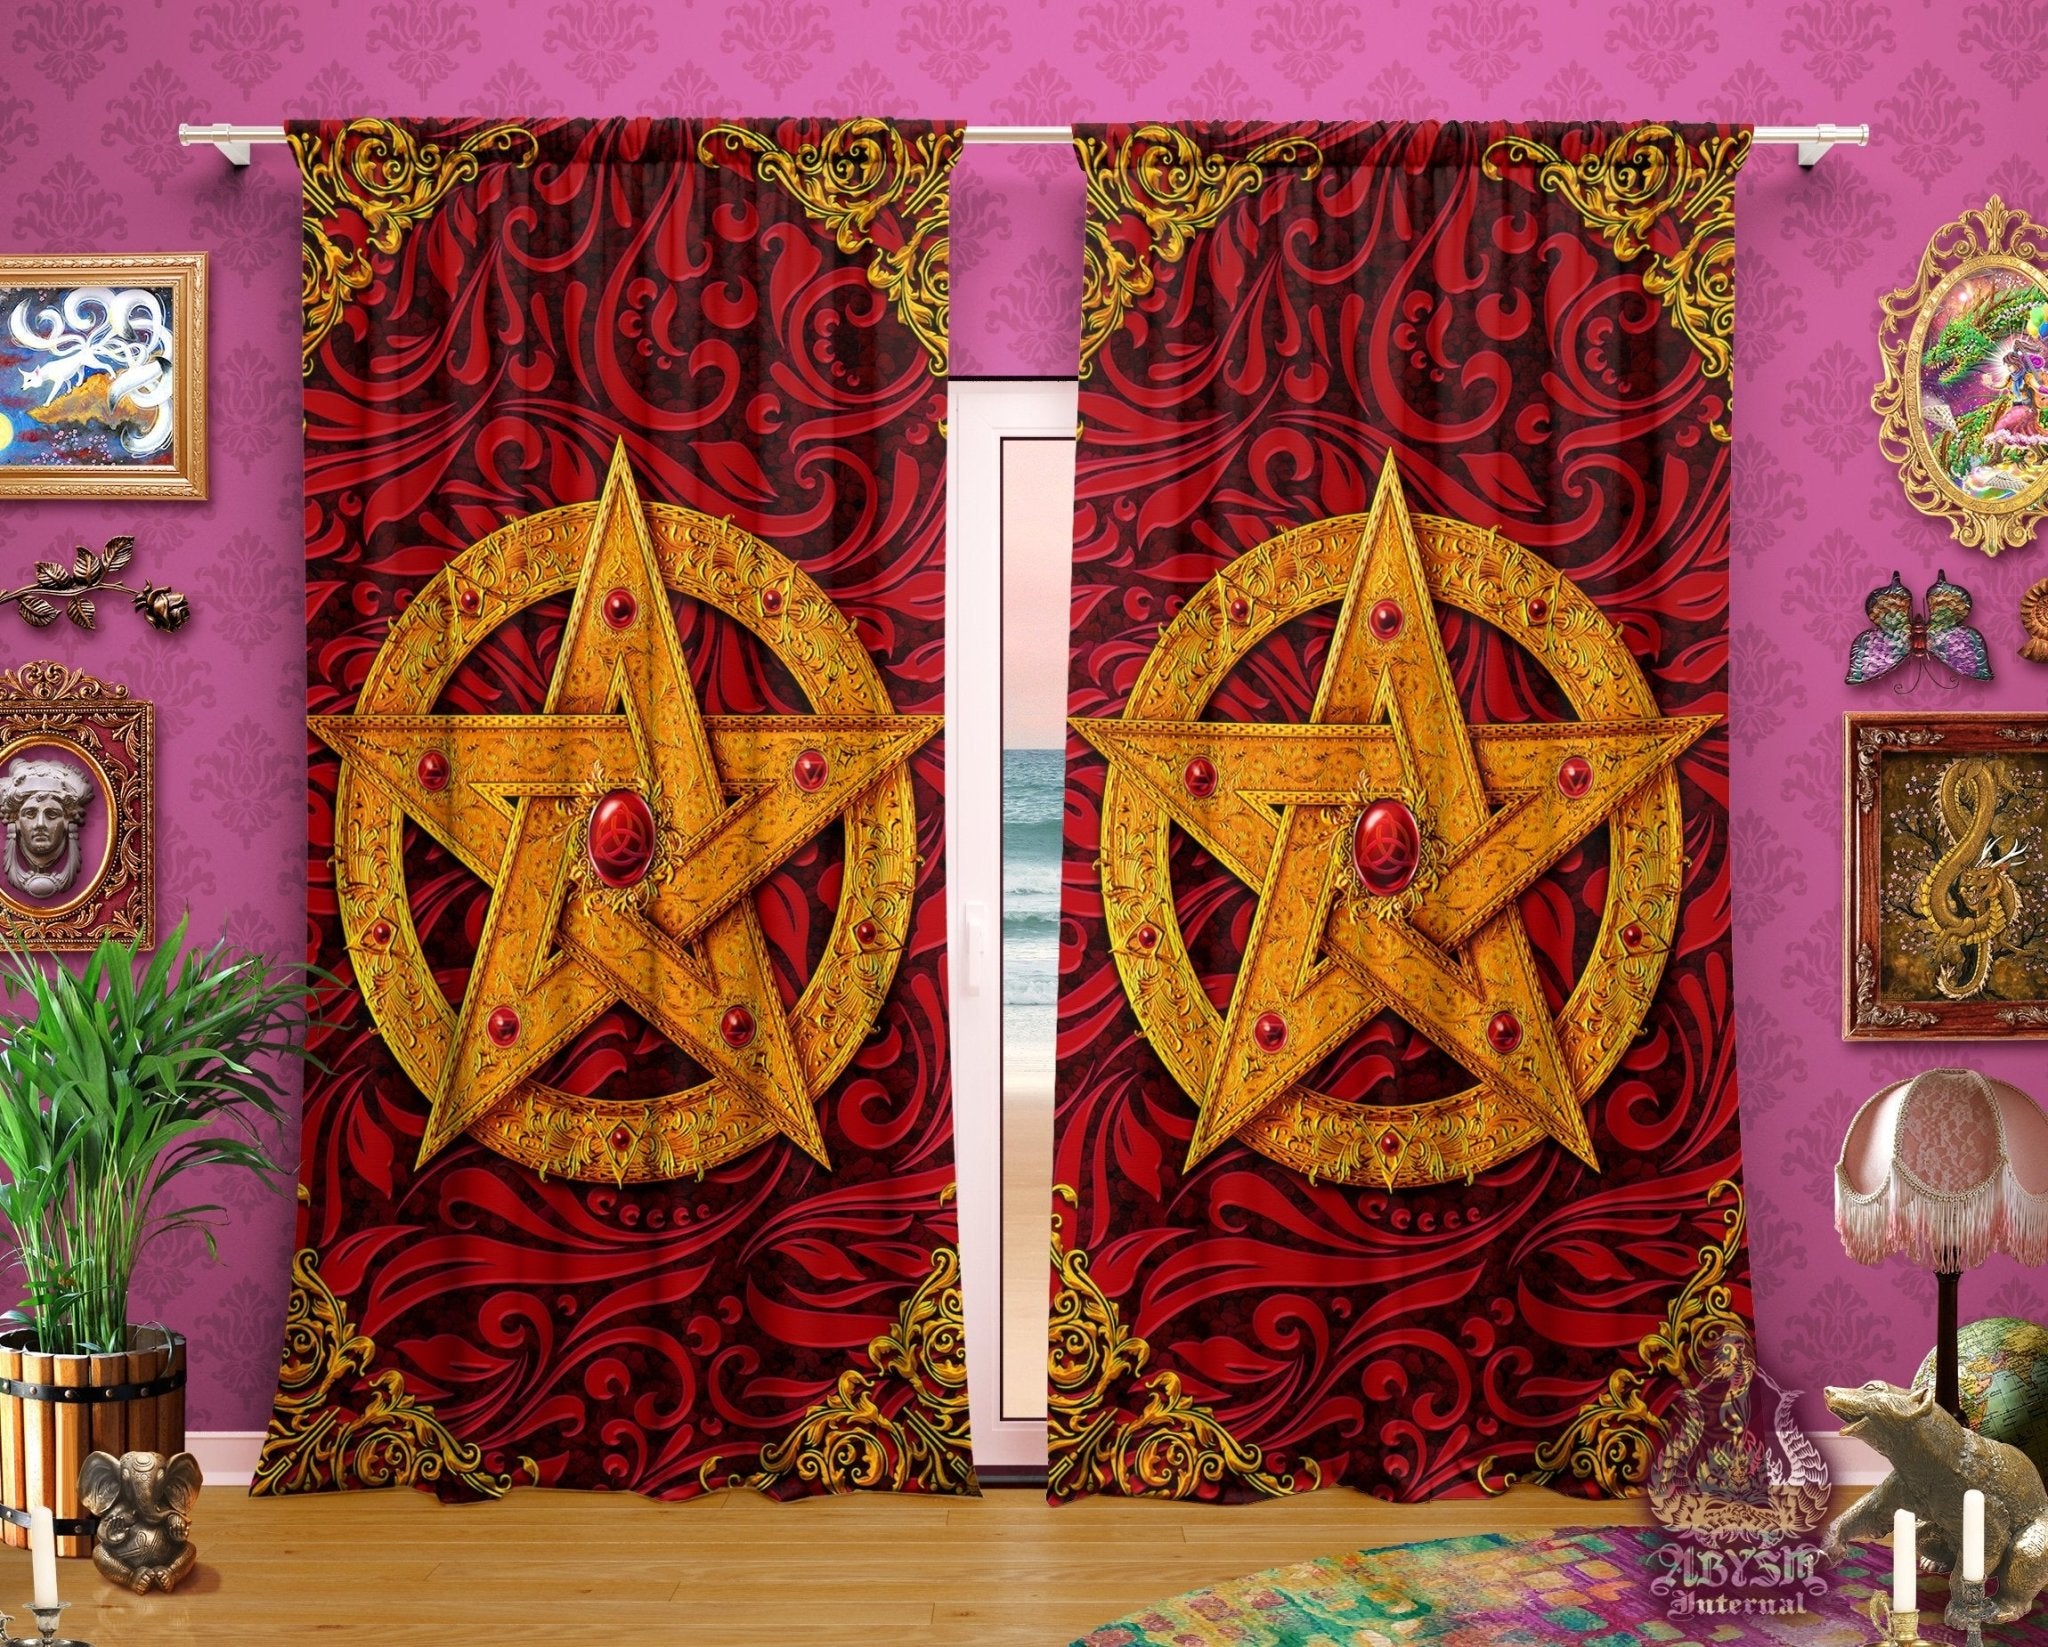 Pentacle Blackout Curtains, Long Window Panels, Witchy Art Print, Wiccan Room Decor, Funky and Eclectic Home Decor - Red - Abysm Internal